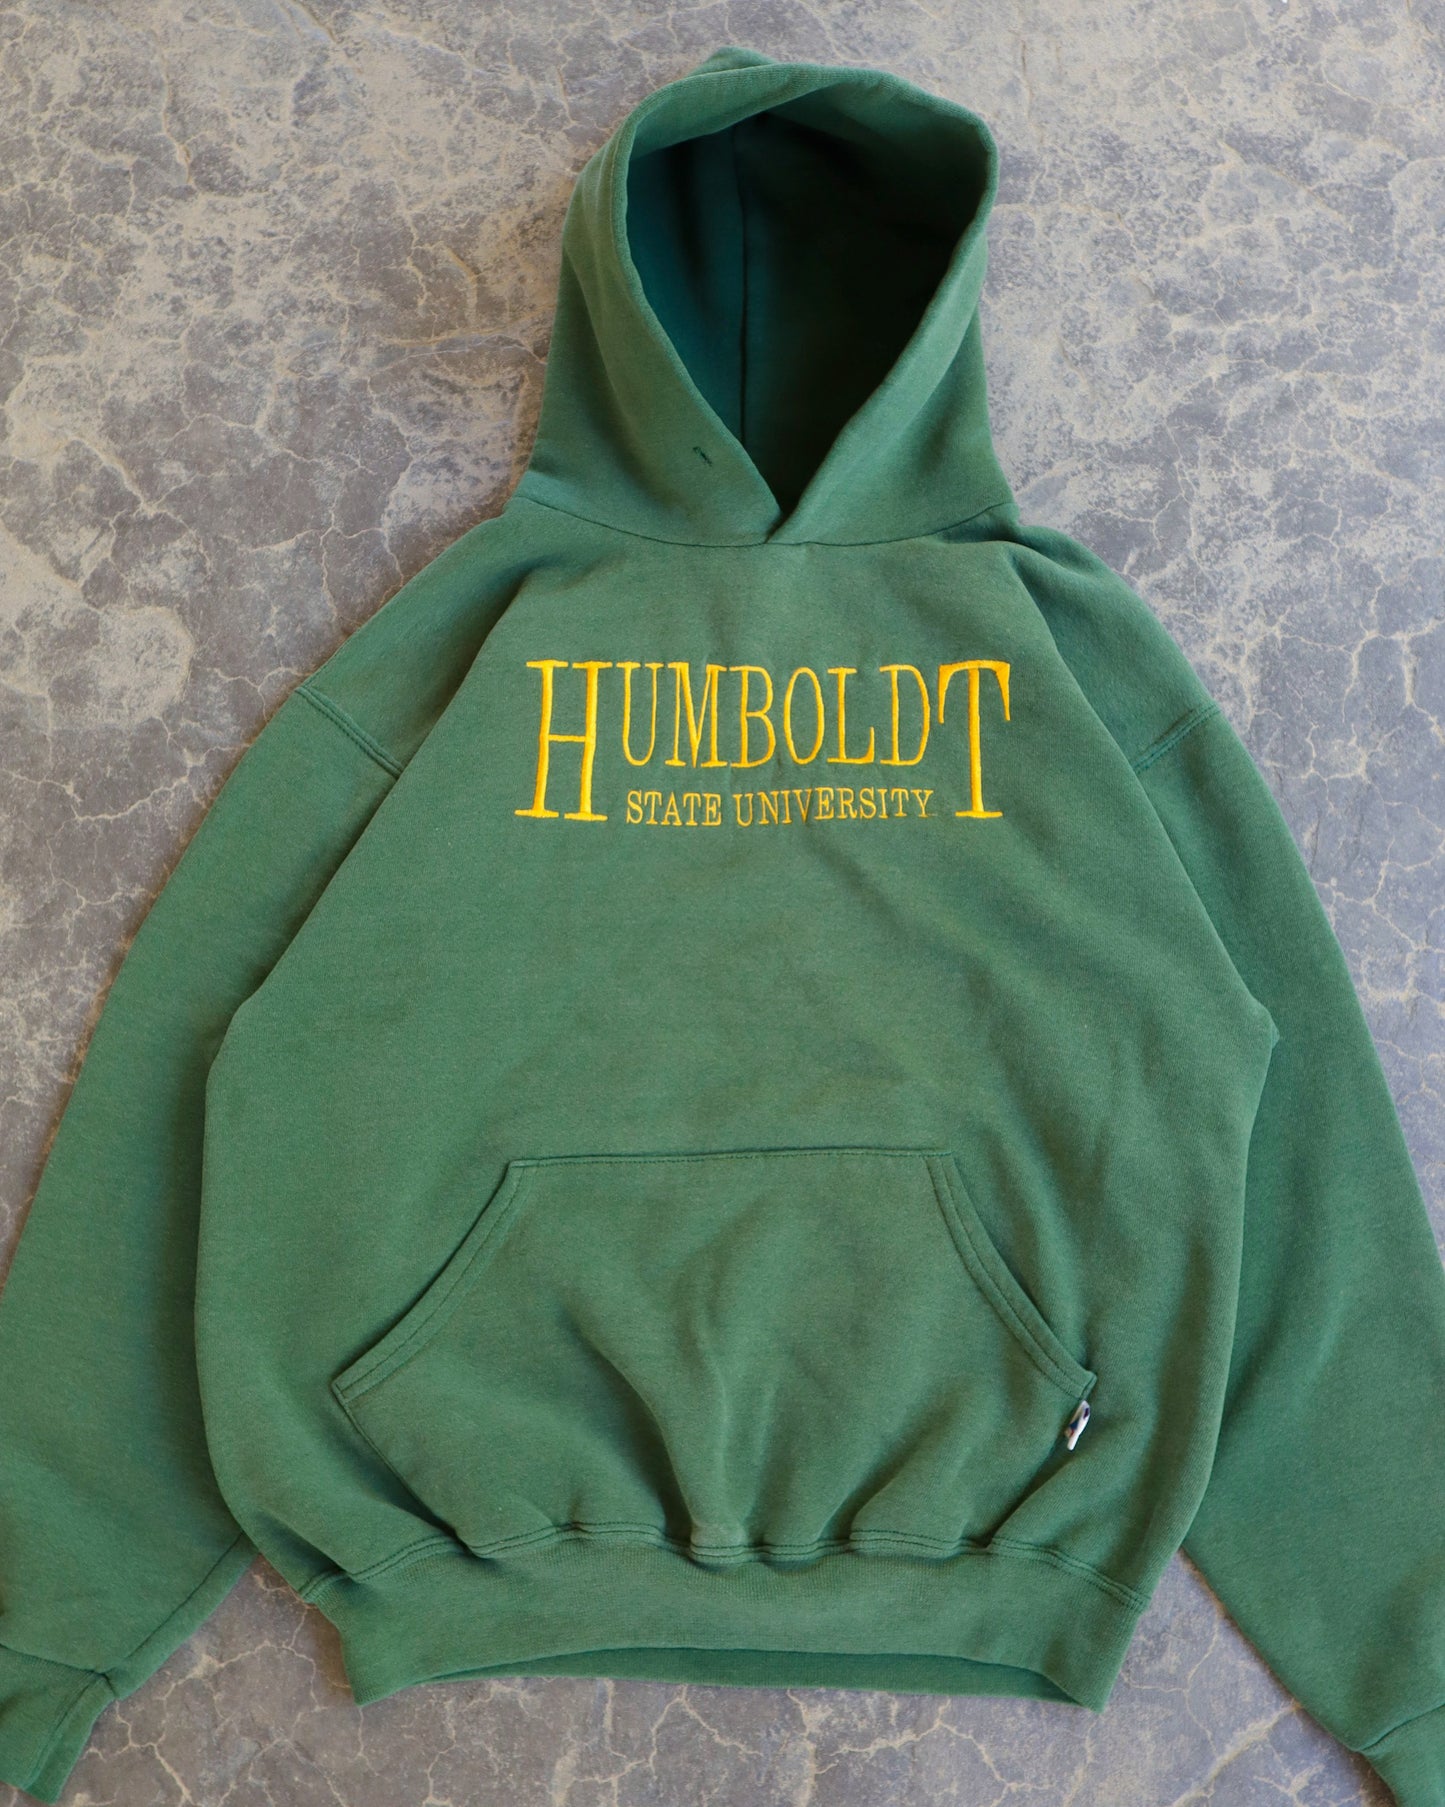 90s Russell Athletic Humboldt Green Hoodie - M